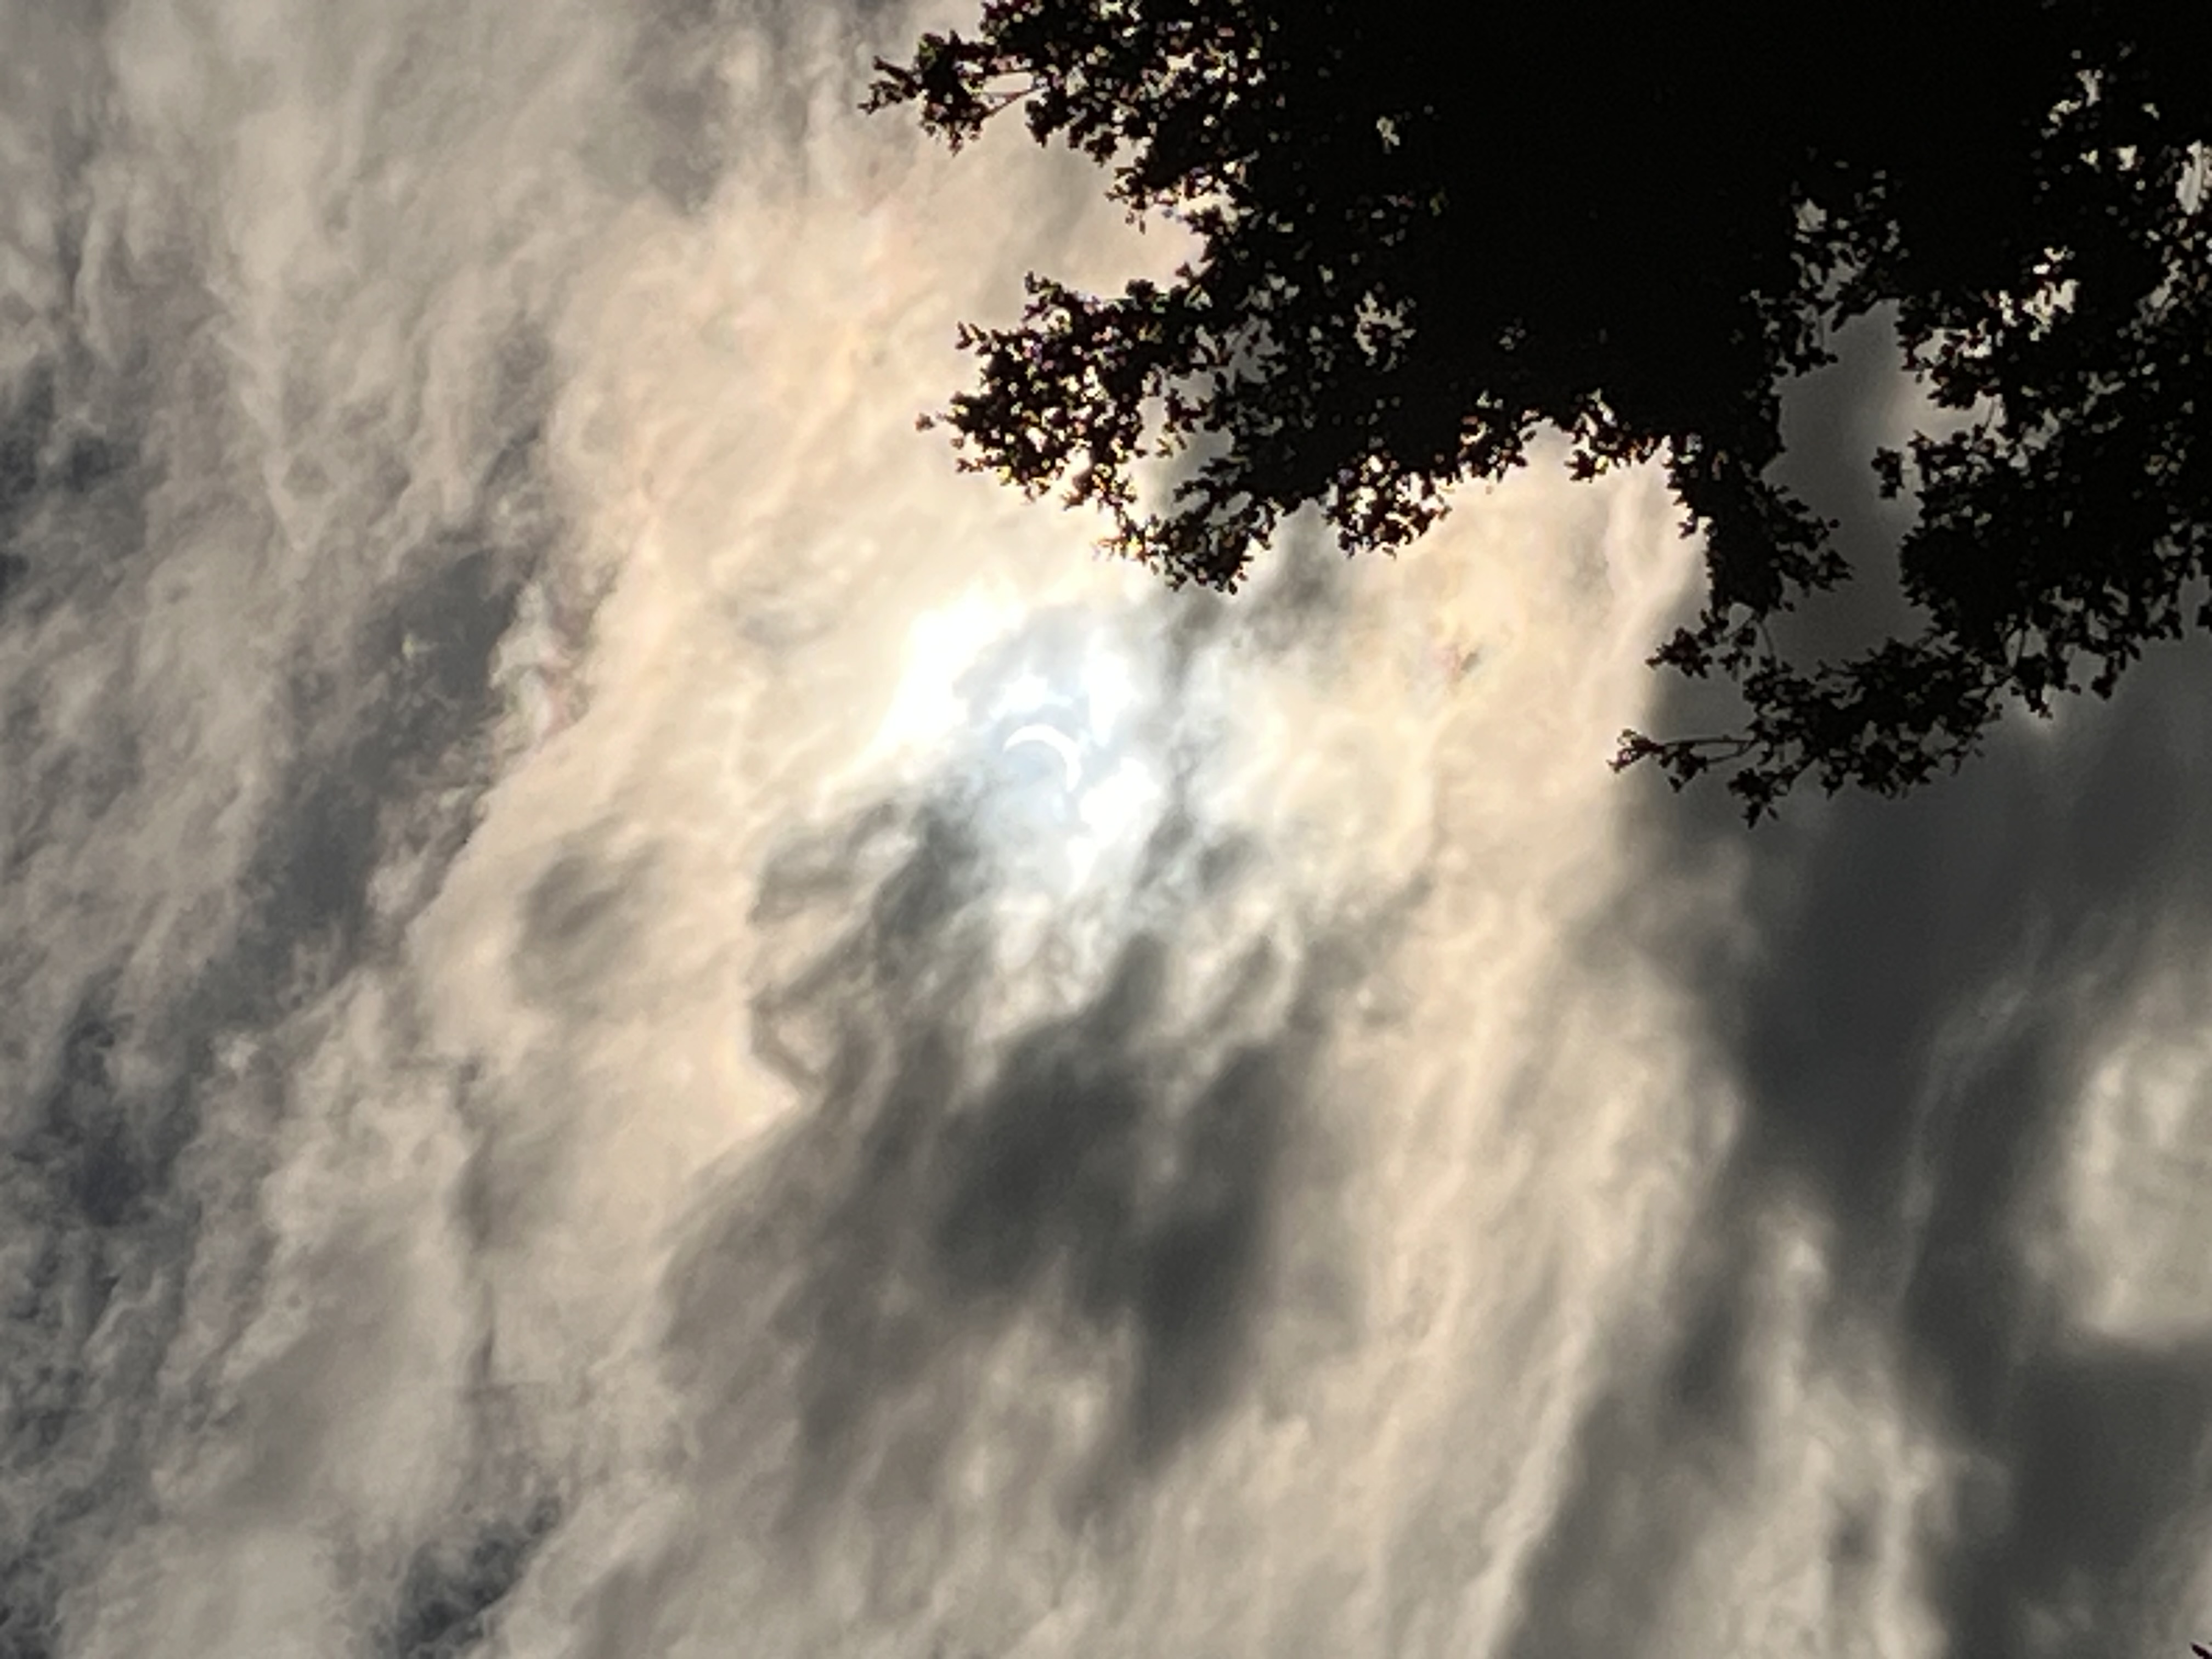 the eclipse shining through some clouds- only a small sliver of the sun is visible. the clouds appear dark grey in the shade but there are less dense spots where they appear a light gold color. in the bottom right there is an oak tree, it looks completely black cuz its the shaded side.